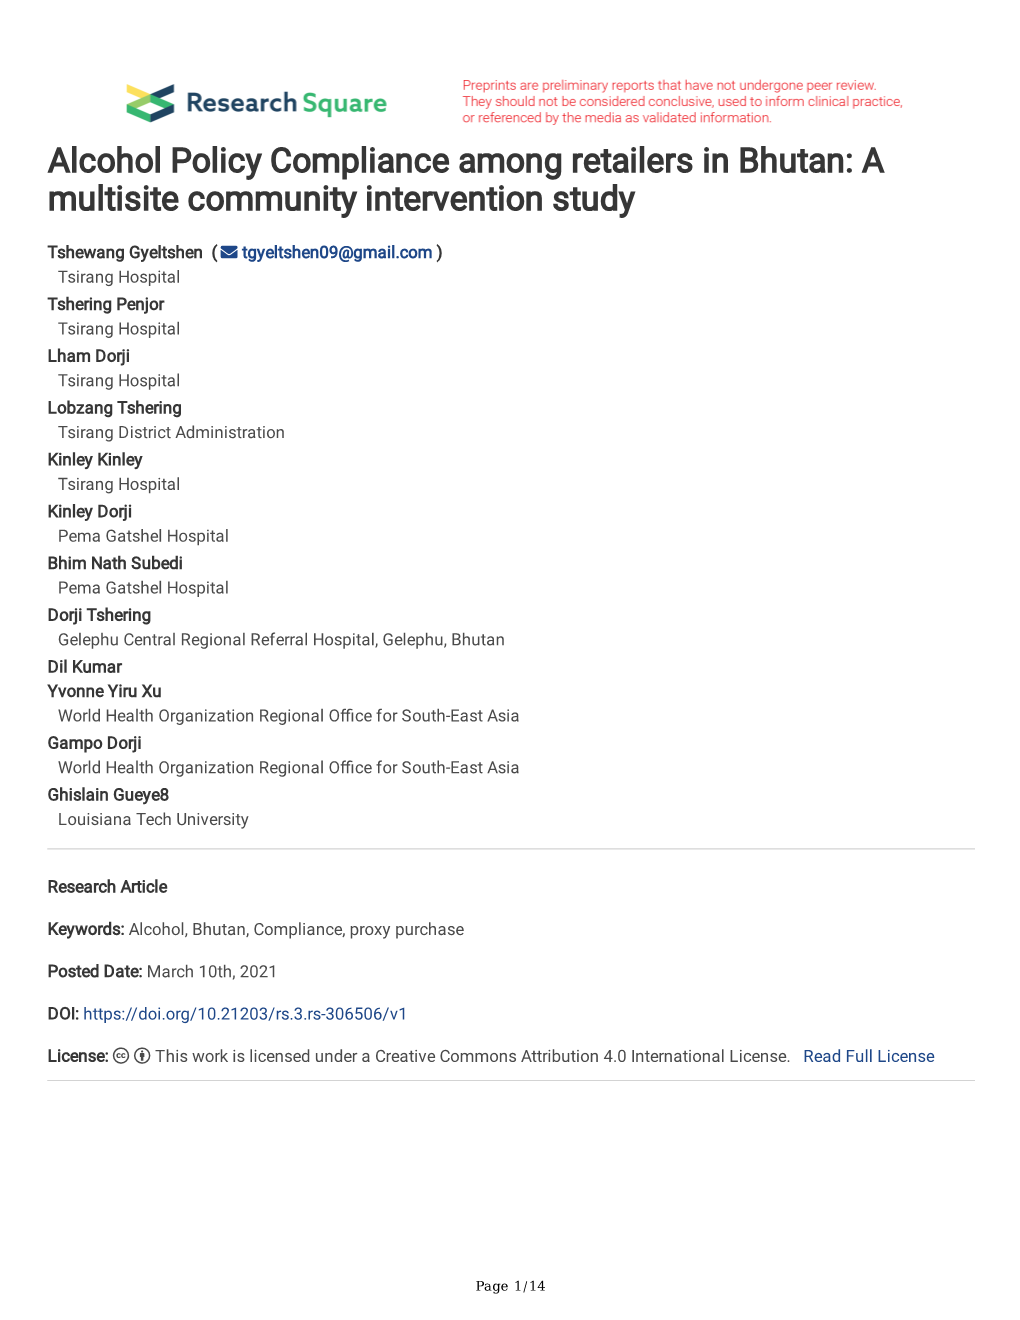 Alcohol Policy Compliance Among Retailers in Bhutan: a Multisite Community Intervention Study